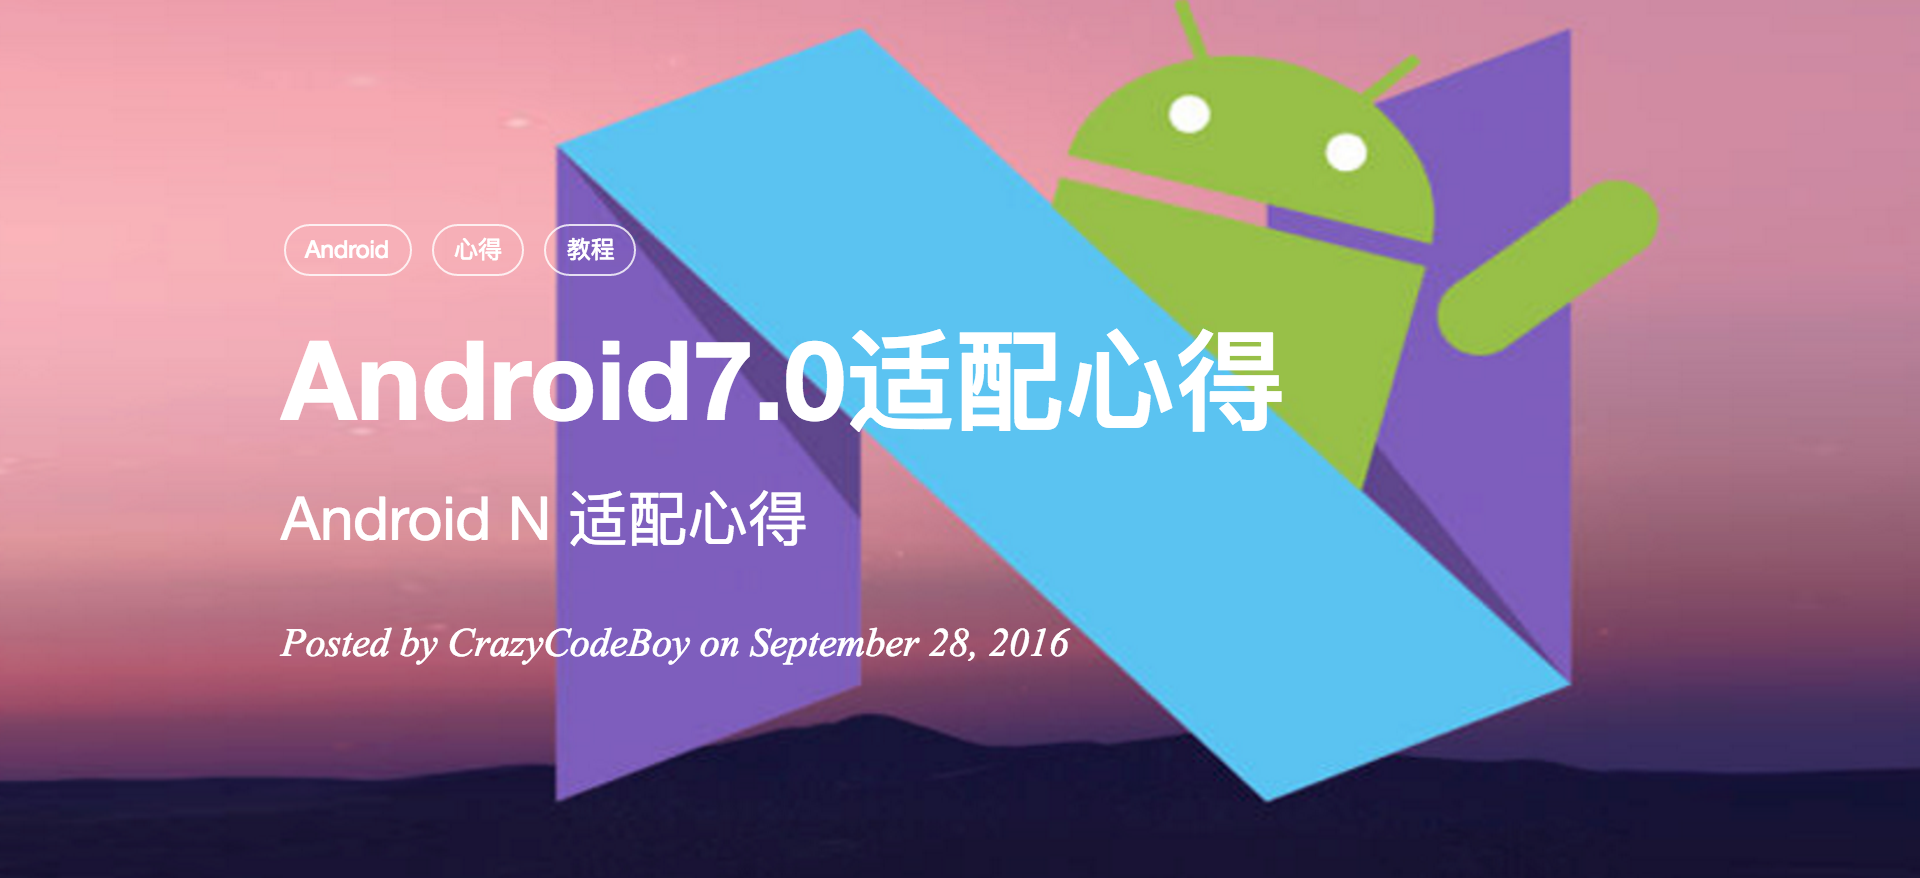 Android7.0(Android N)适配教程，心得